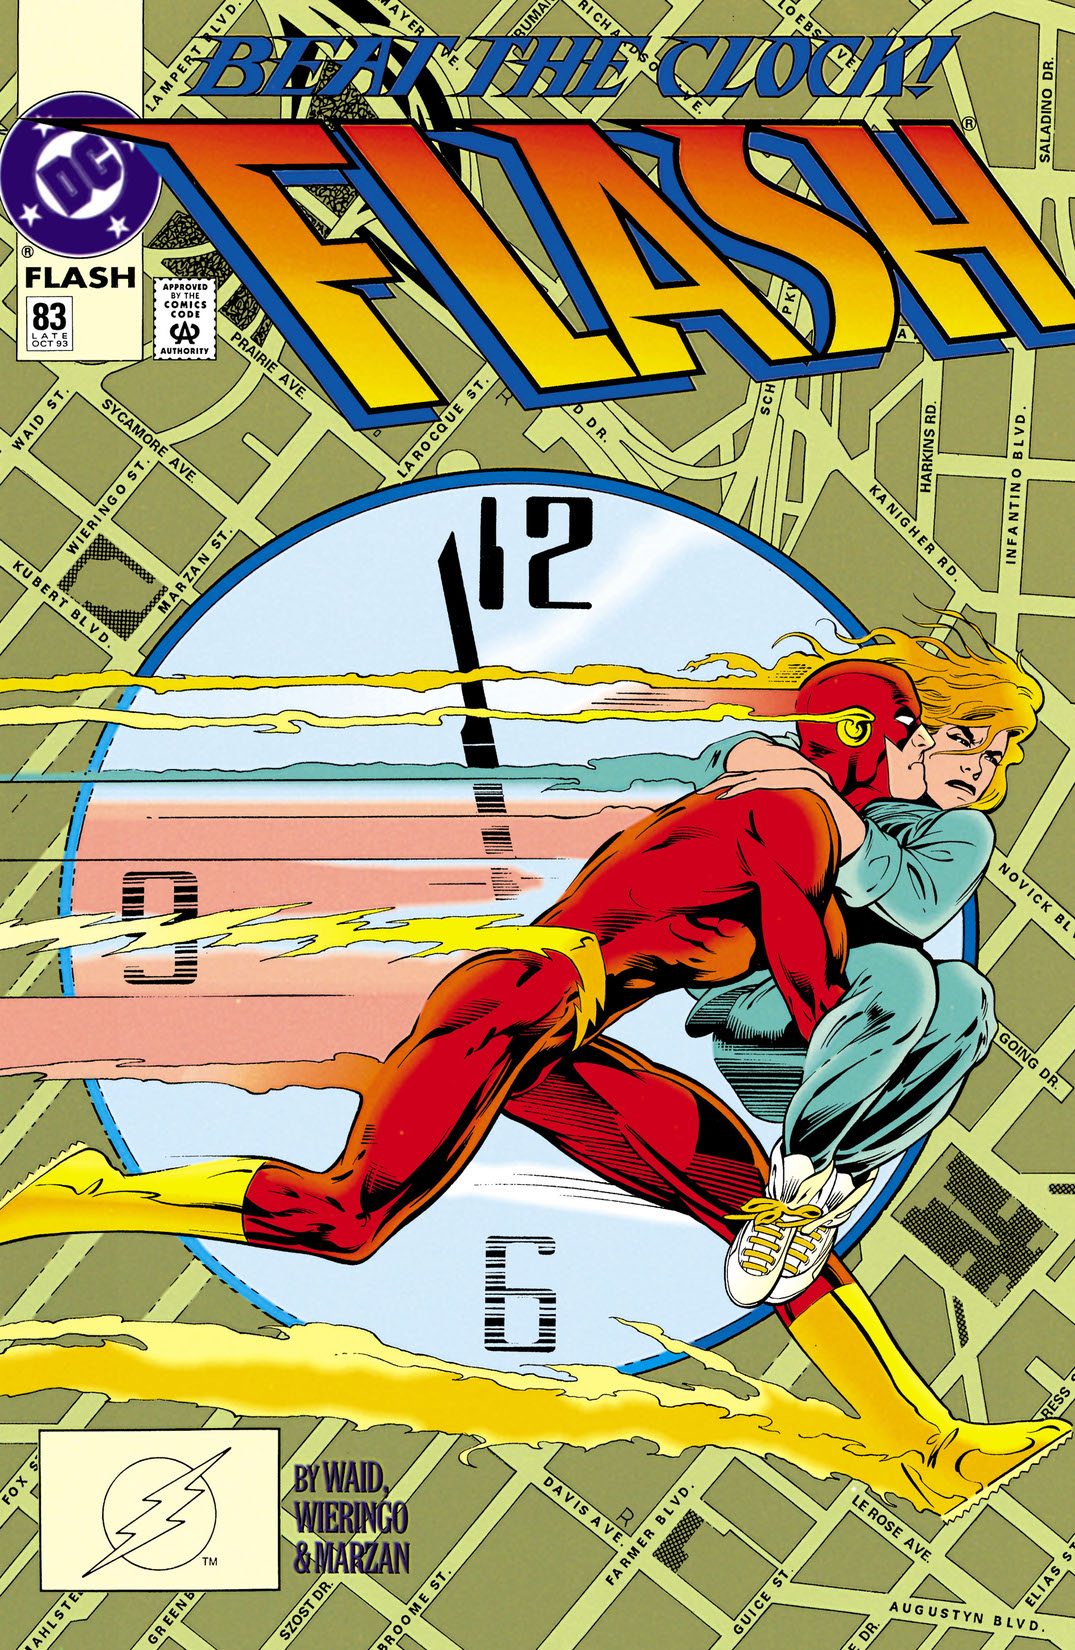 The Flash (1987-2008) #83 preview images